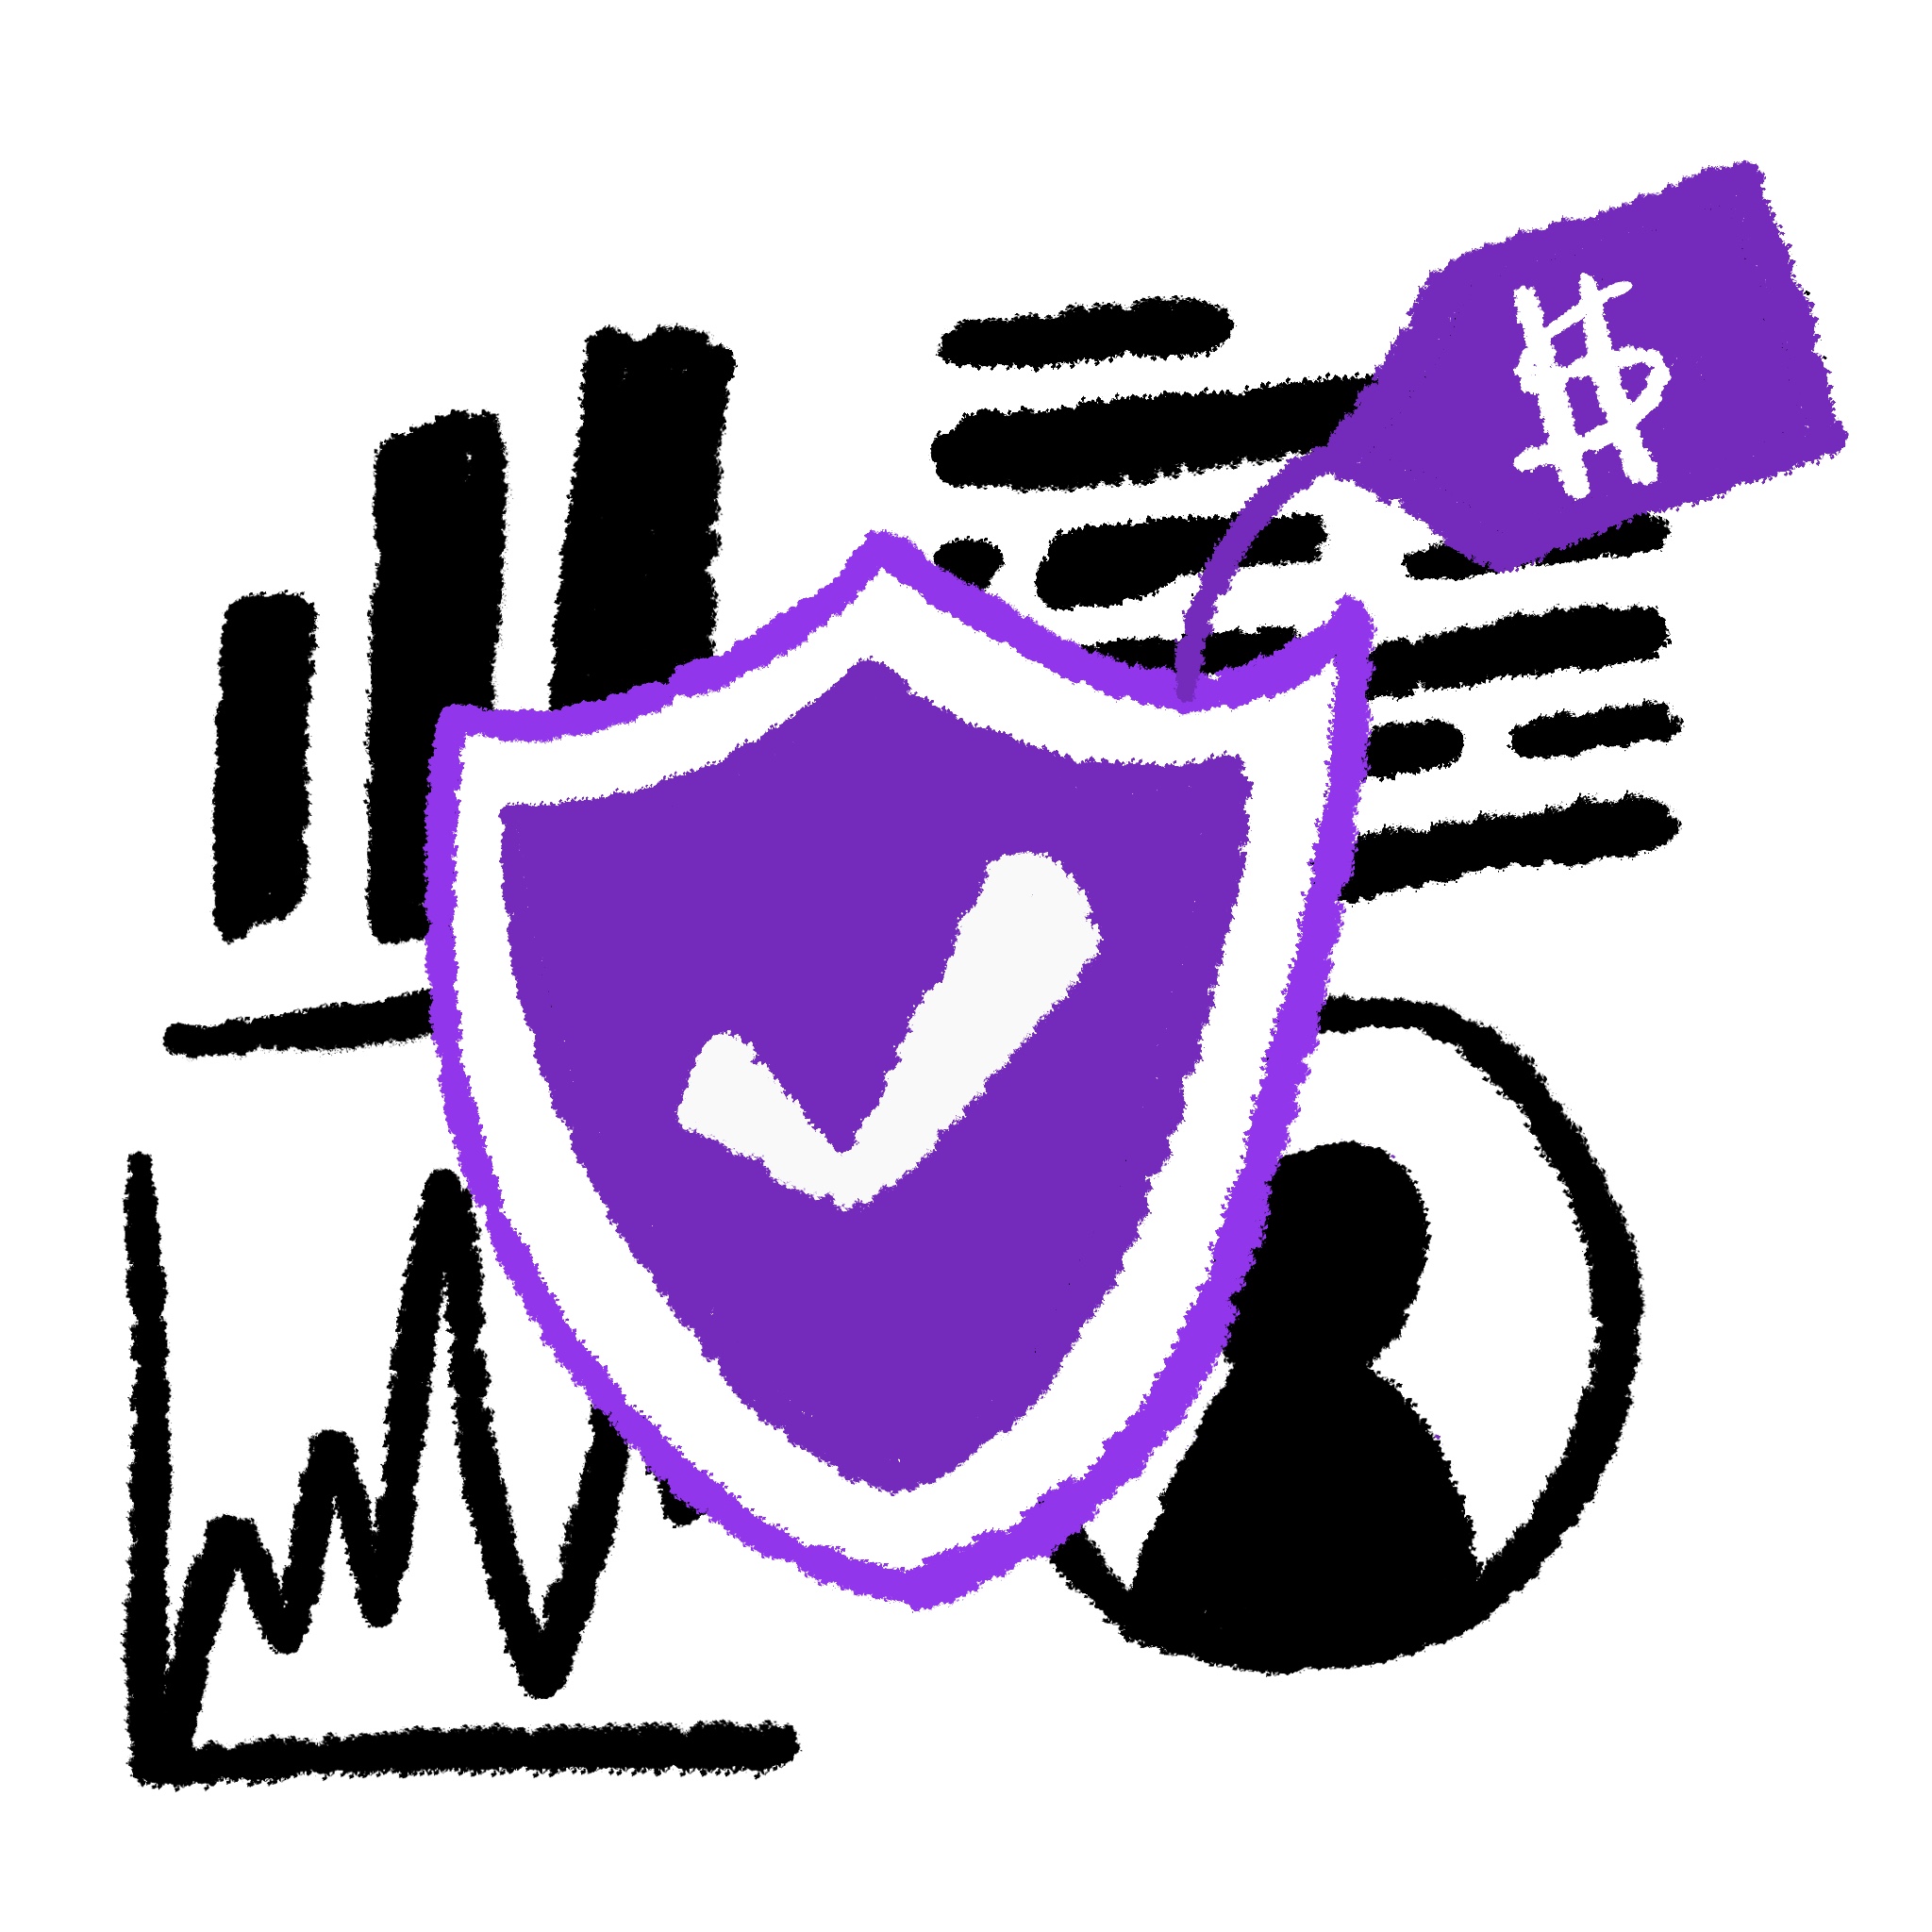 Spot illustration of a purple shield with data behind it